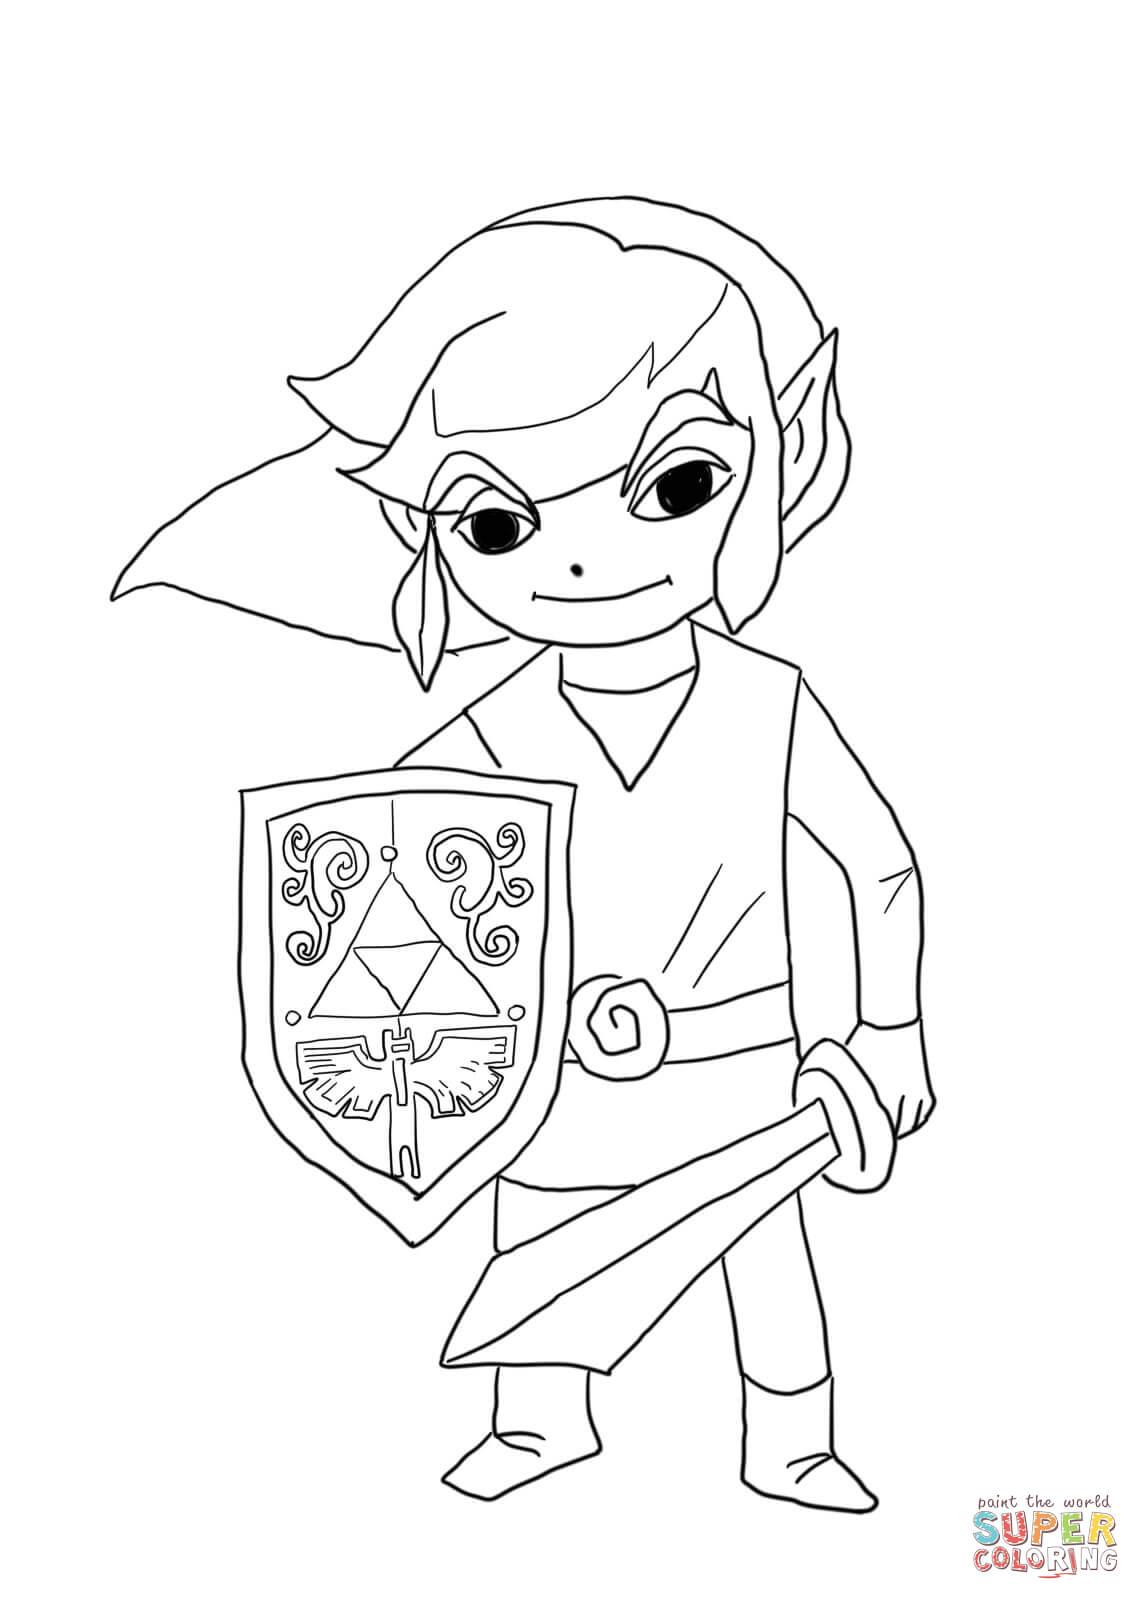 Toon link from legend of zelda wind waker coloring page free printable coloring pages